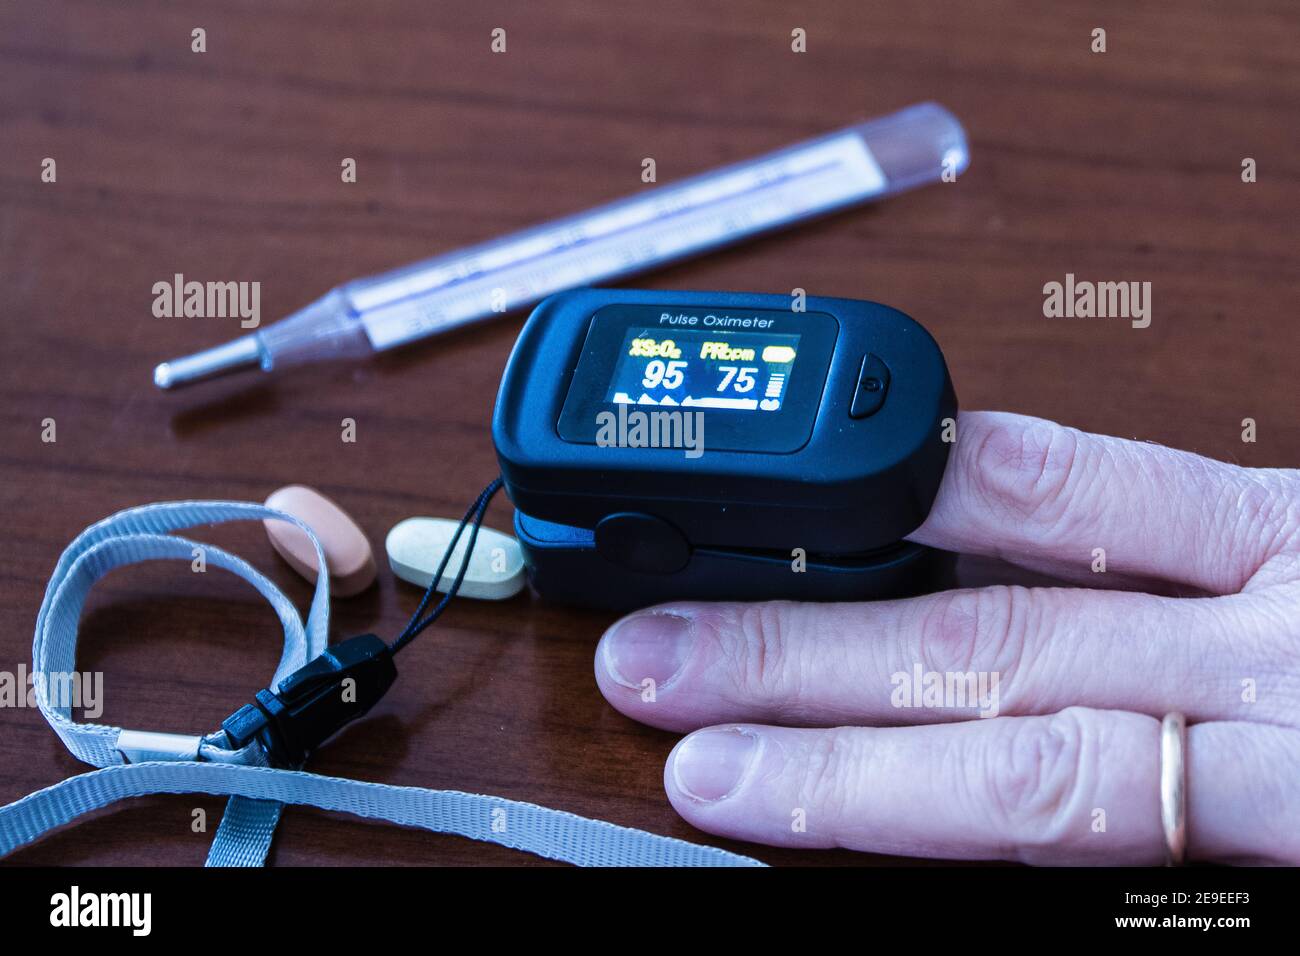 Measuring saturation with a finger pulse oximeter during coronavirus positivity Stock Photo